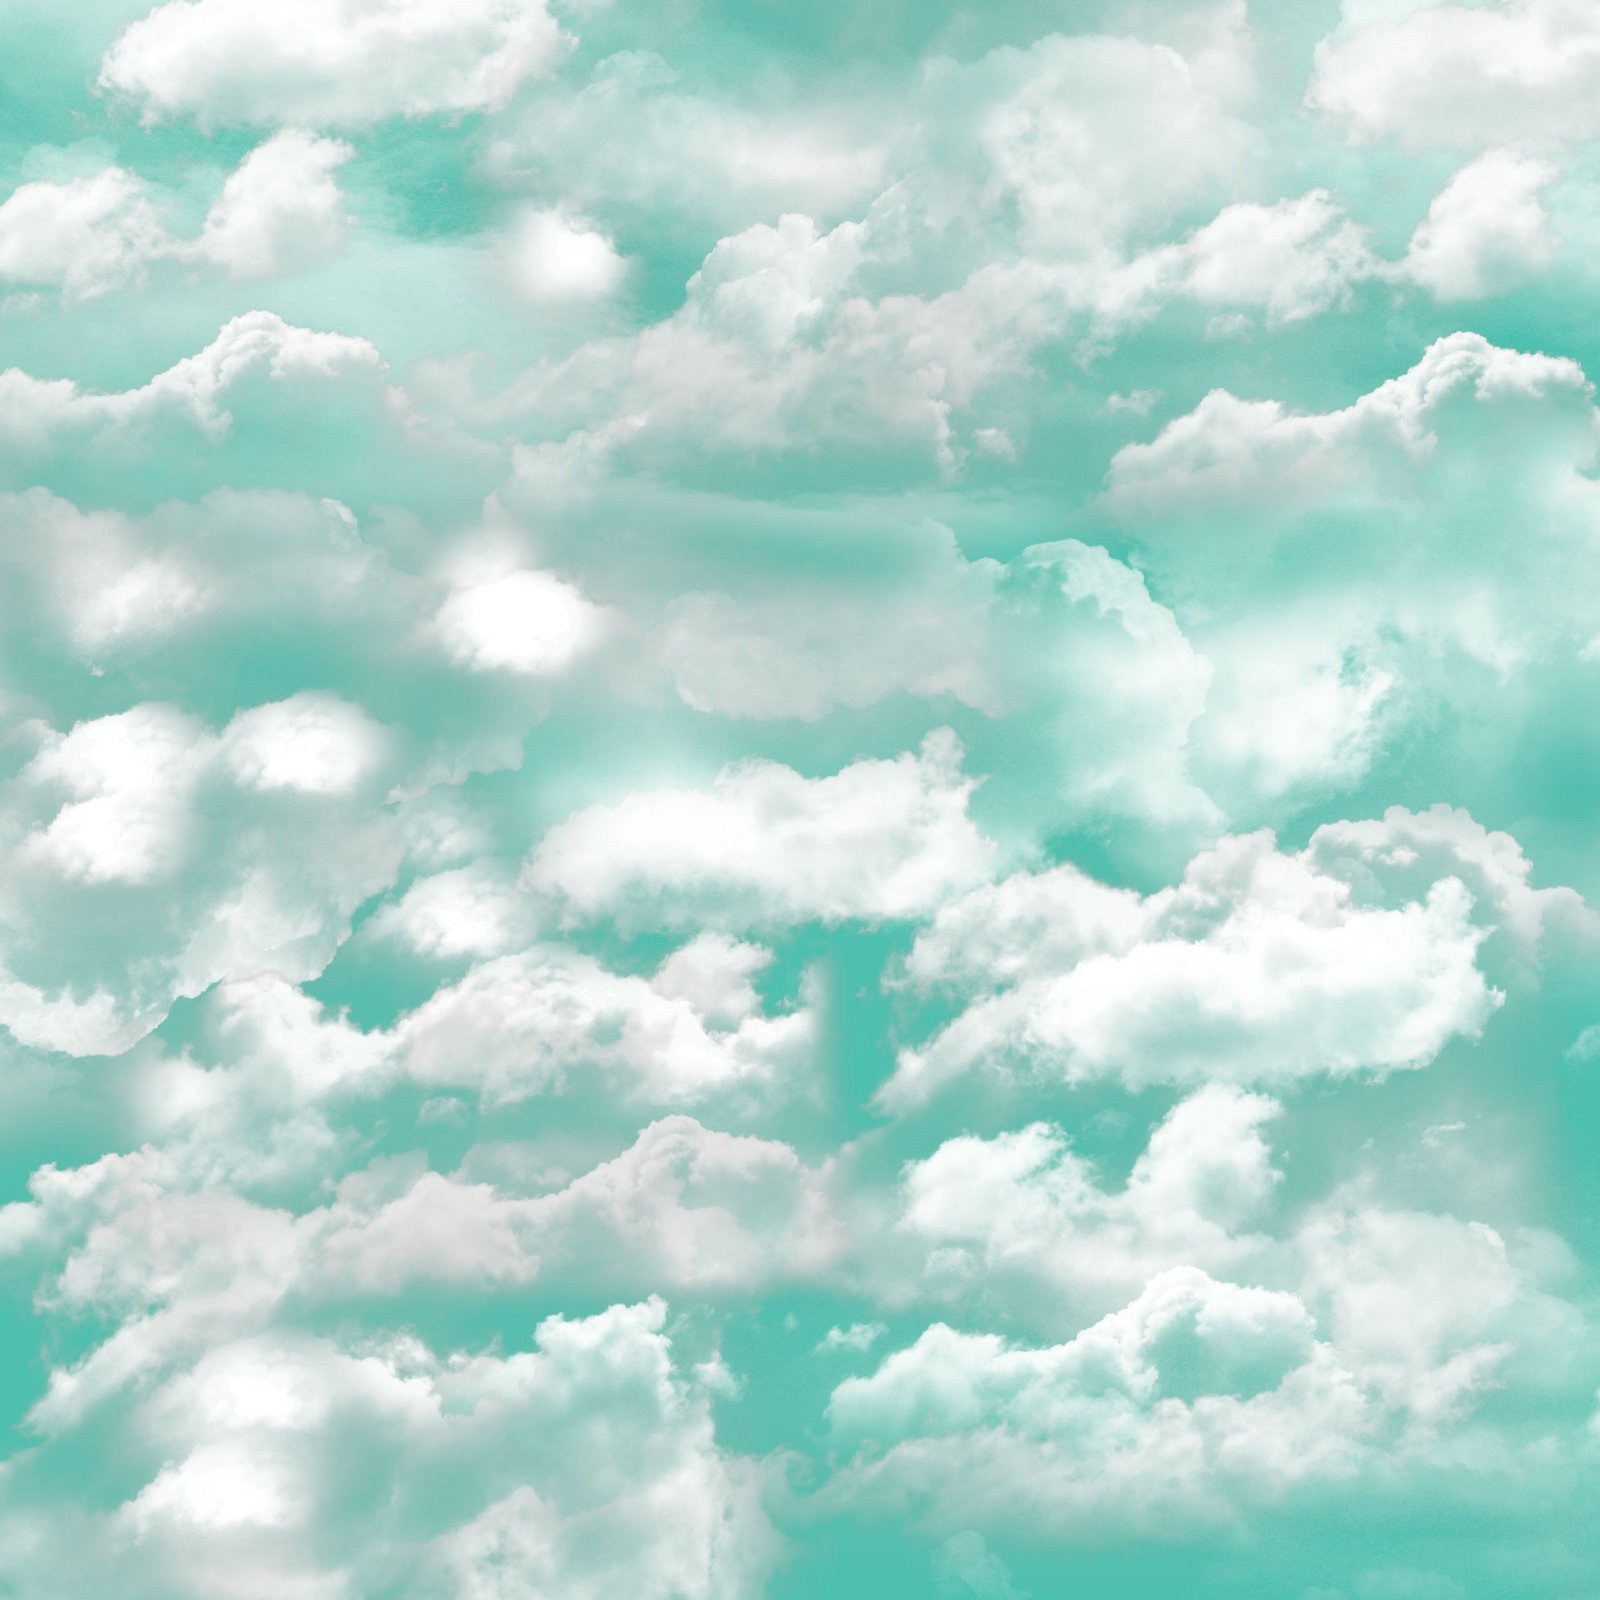 Cloud Texture Background Free to Download by desintgnmou on